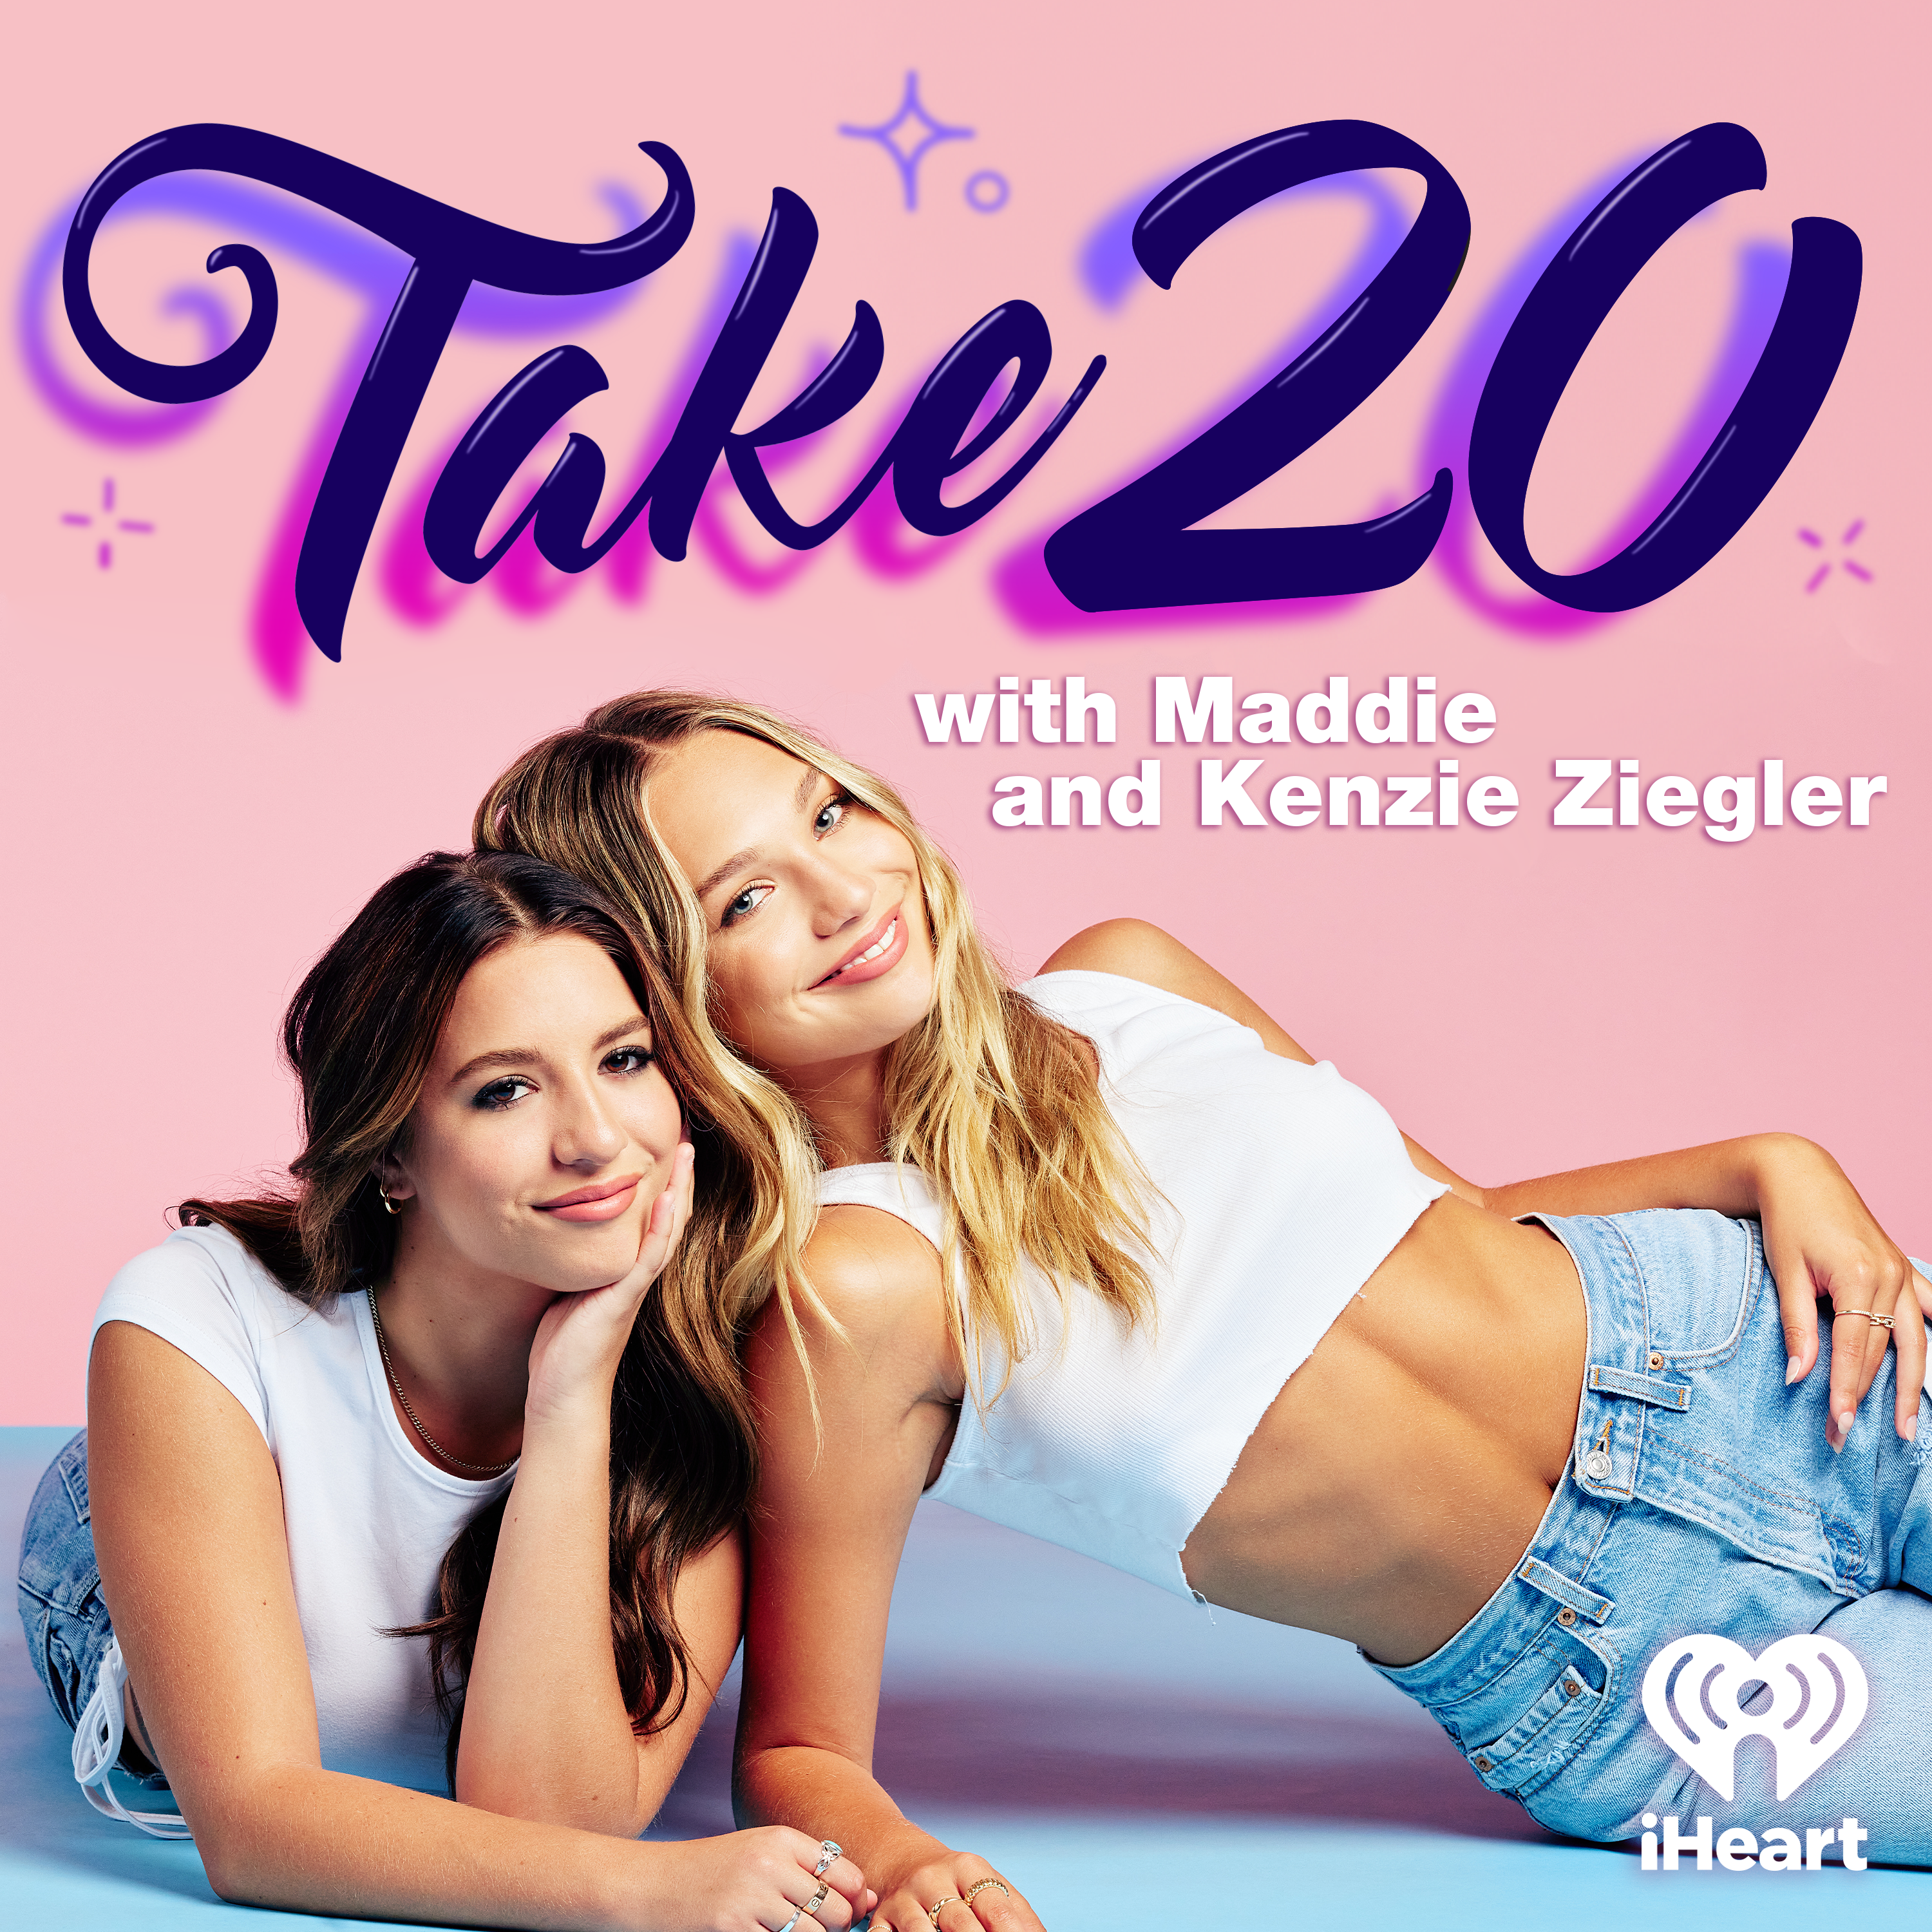 Introducing Take 20 with Maddie and Kenzie